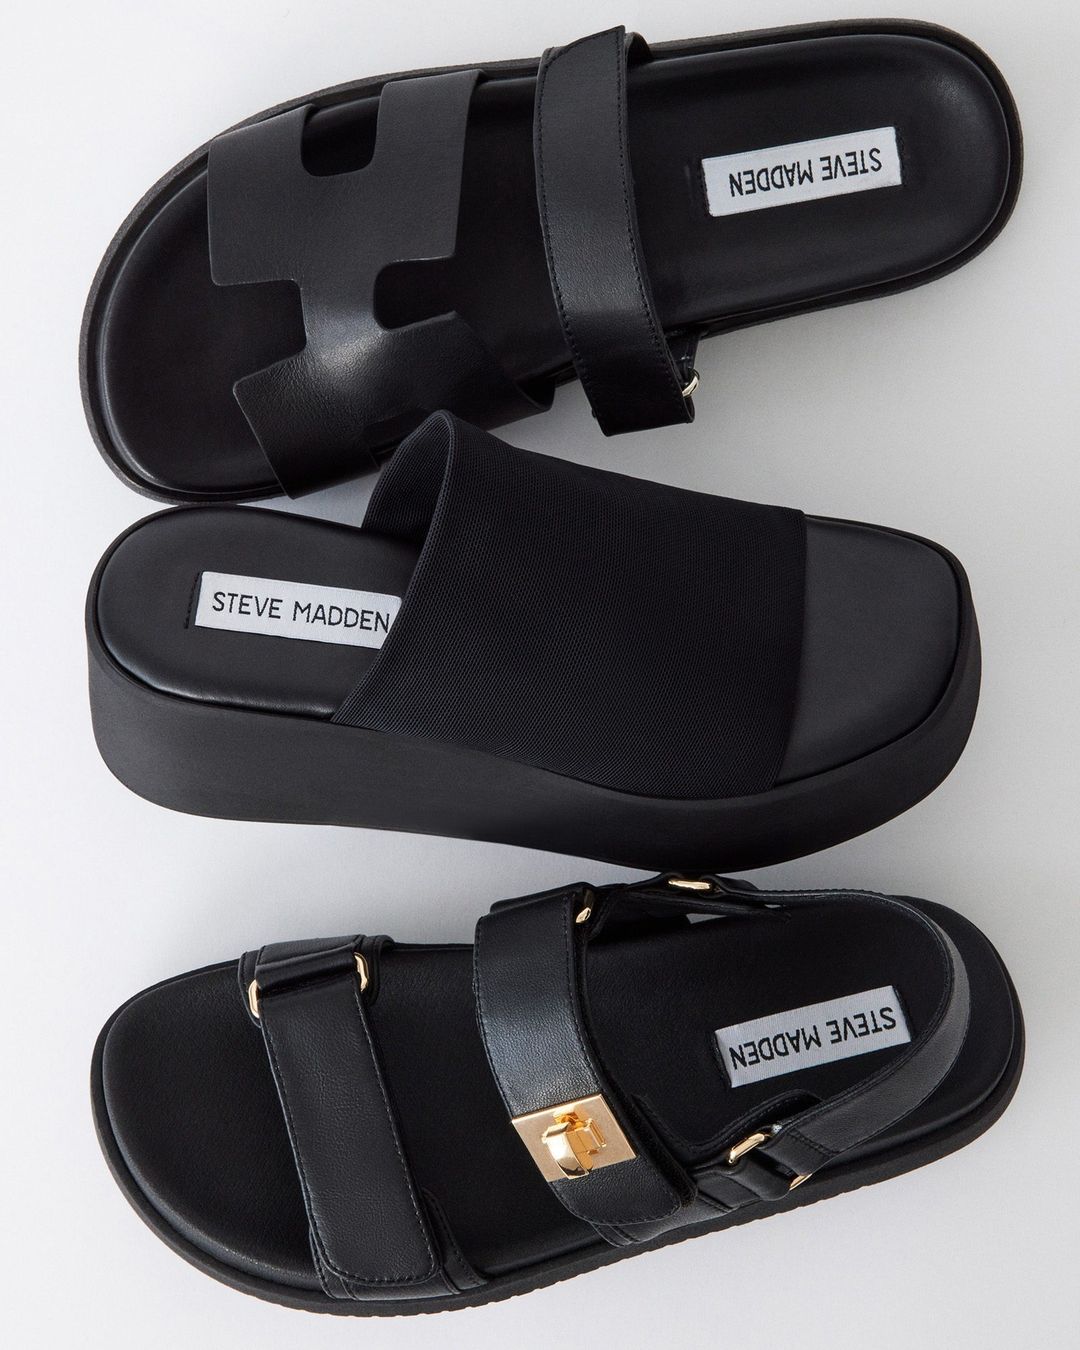 Three different styles of black sandals.